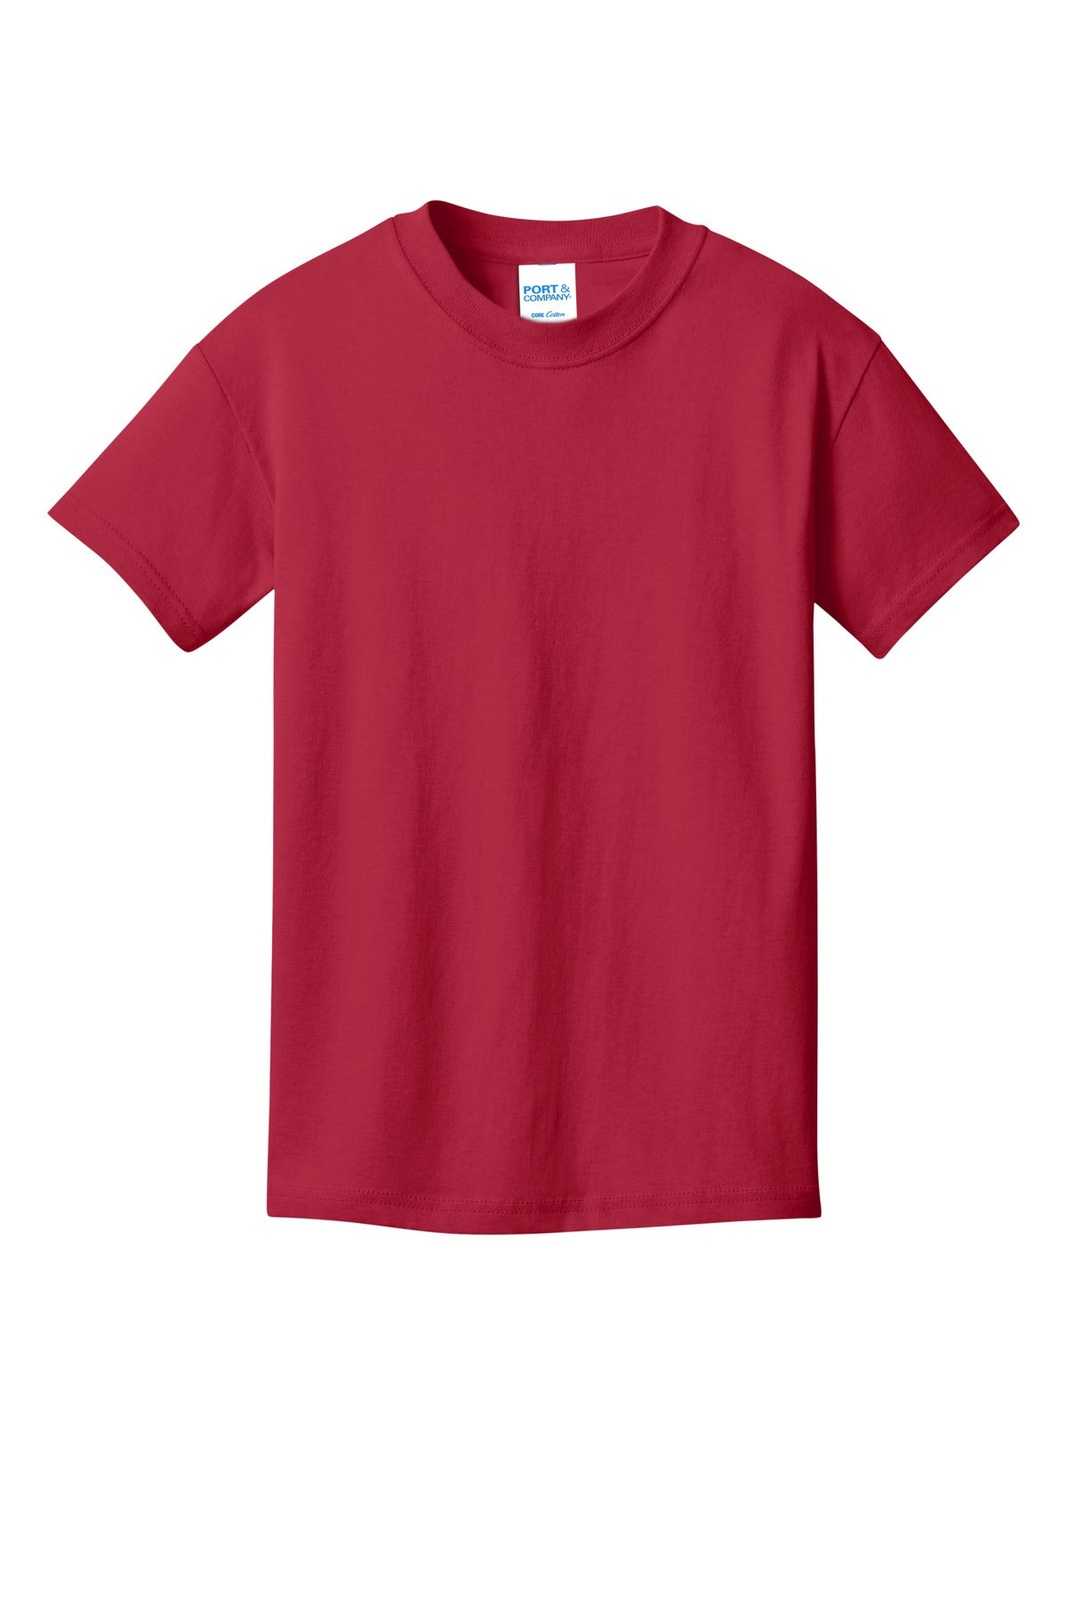 Port & Company PC54YDTG Youth Core Cotton DTG Tee - Red - HIT a Double - 1